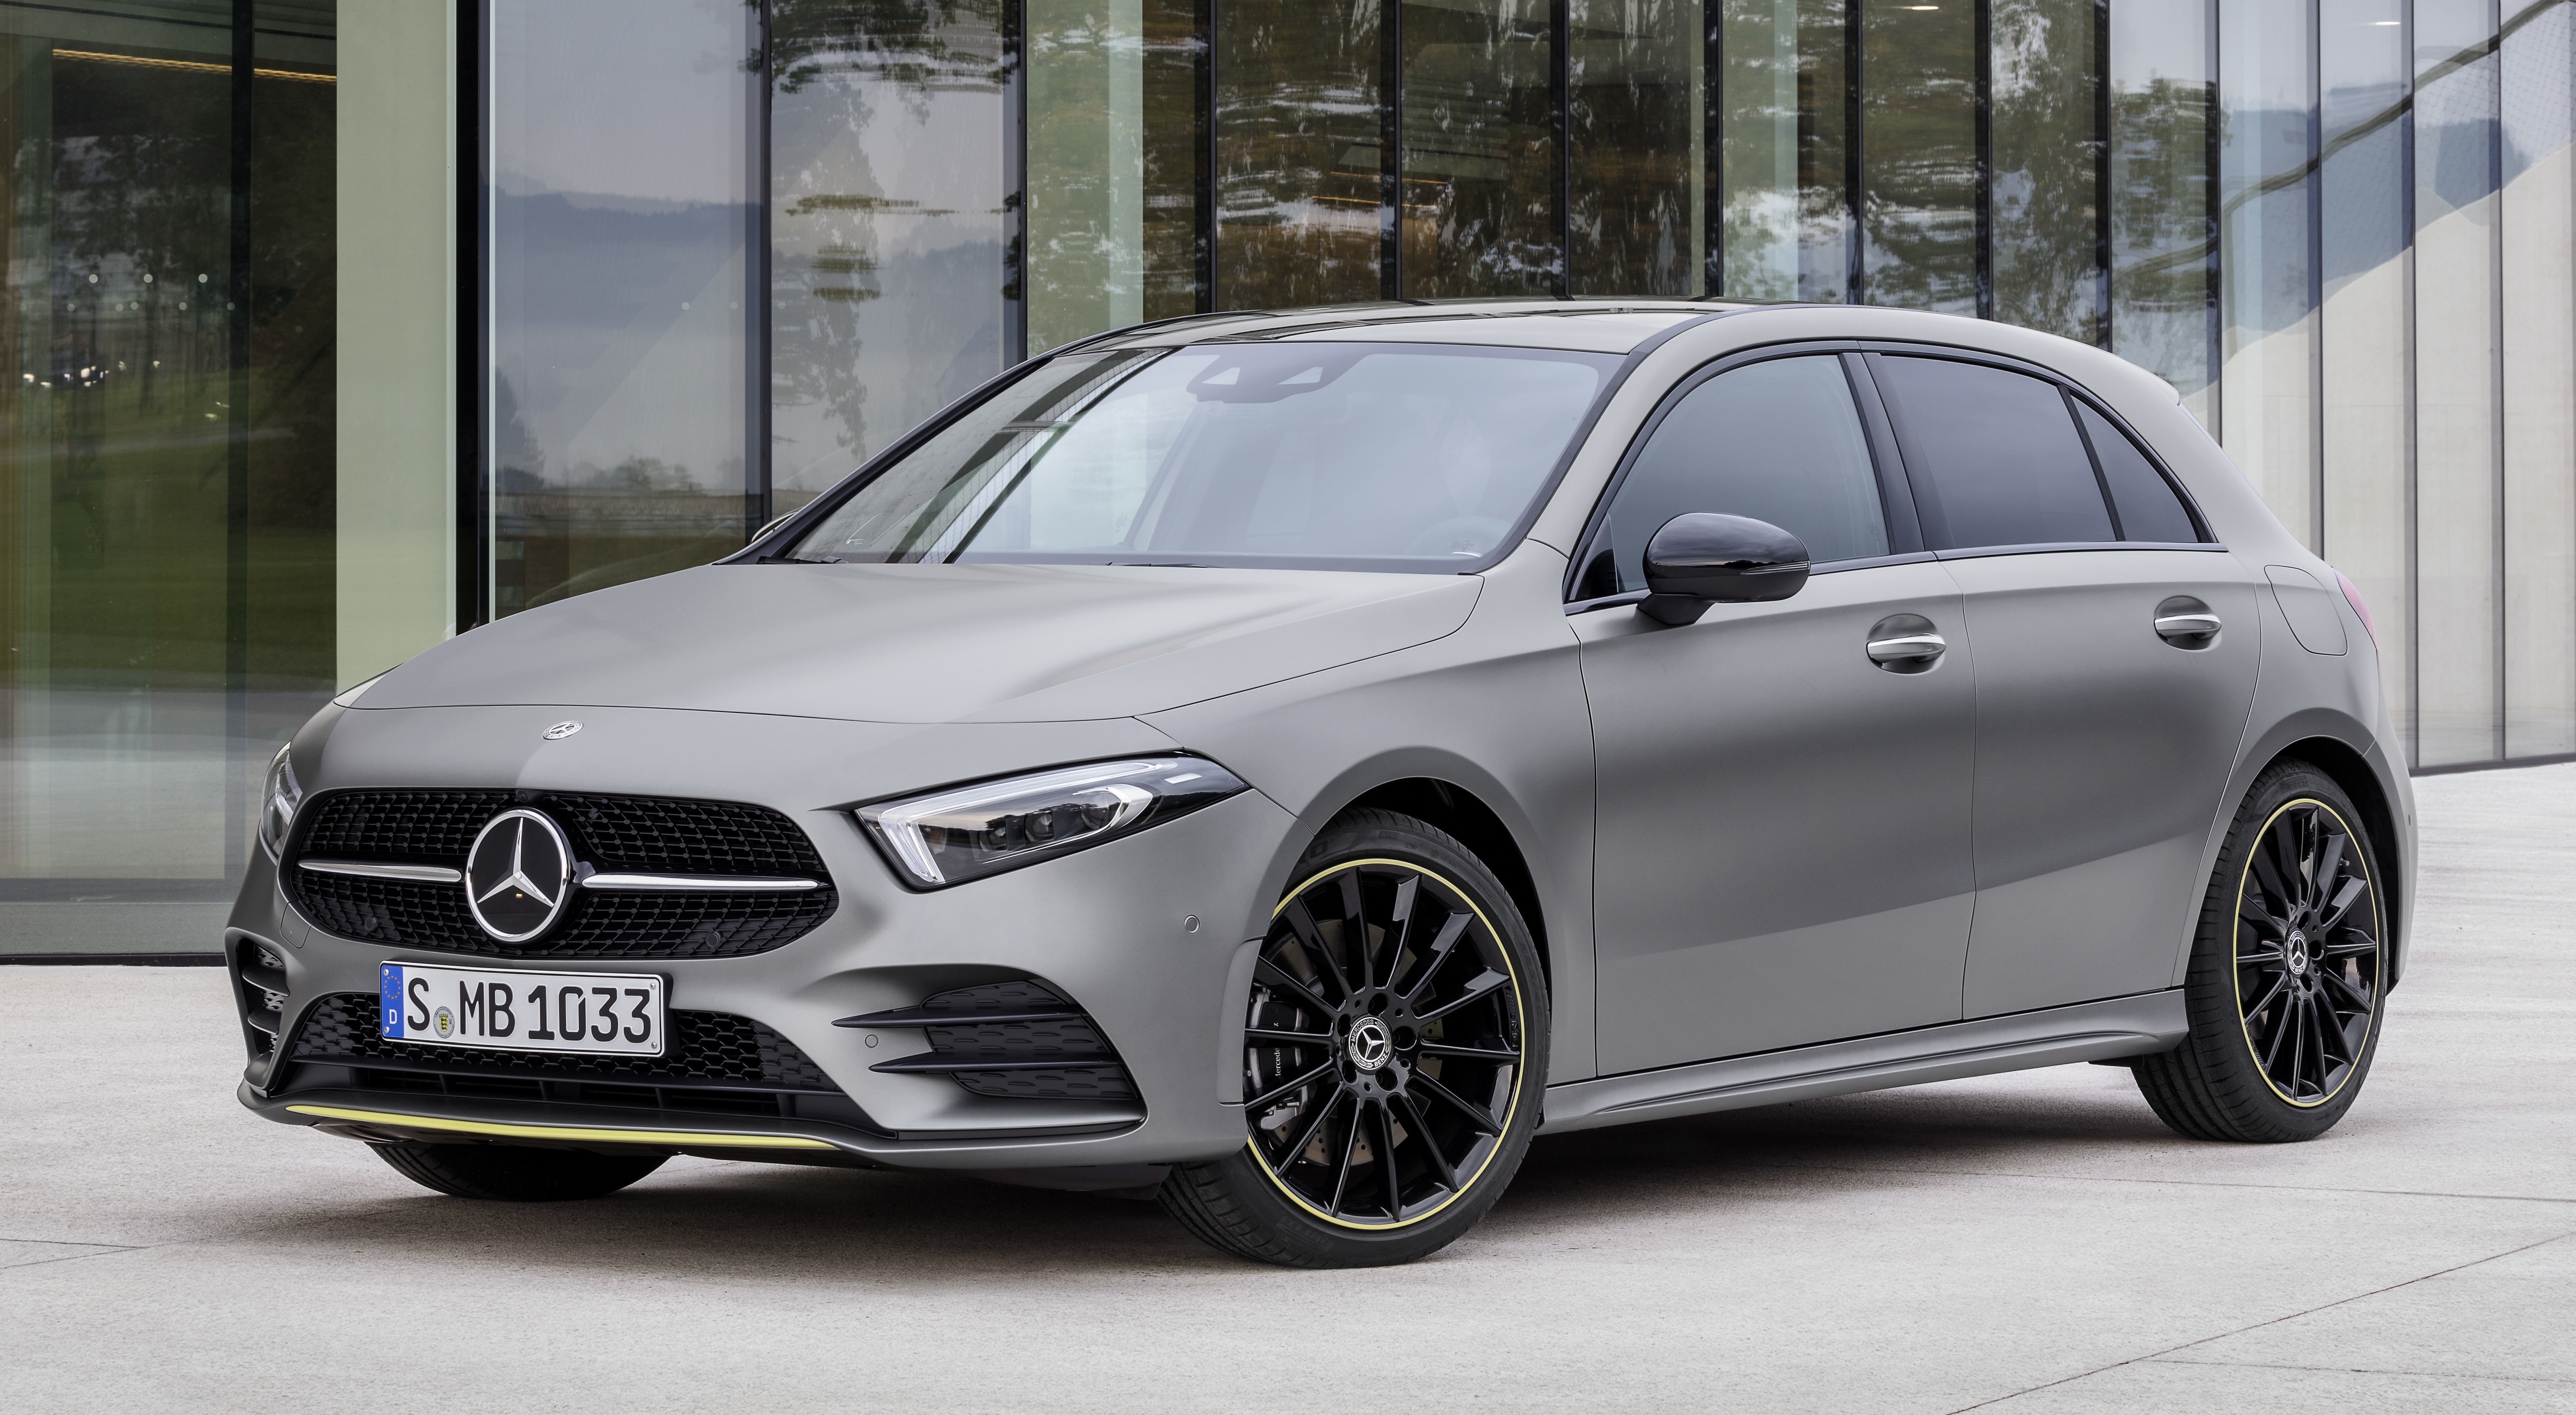 2018 Mercedes-Benz A-Class platform to be used for eight new models - chief designer Gorden Wagener